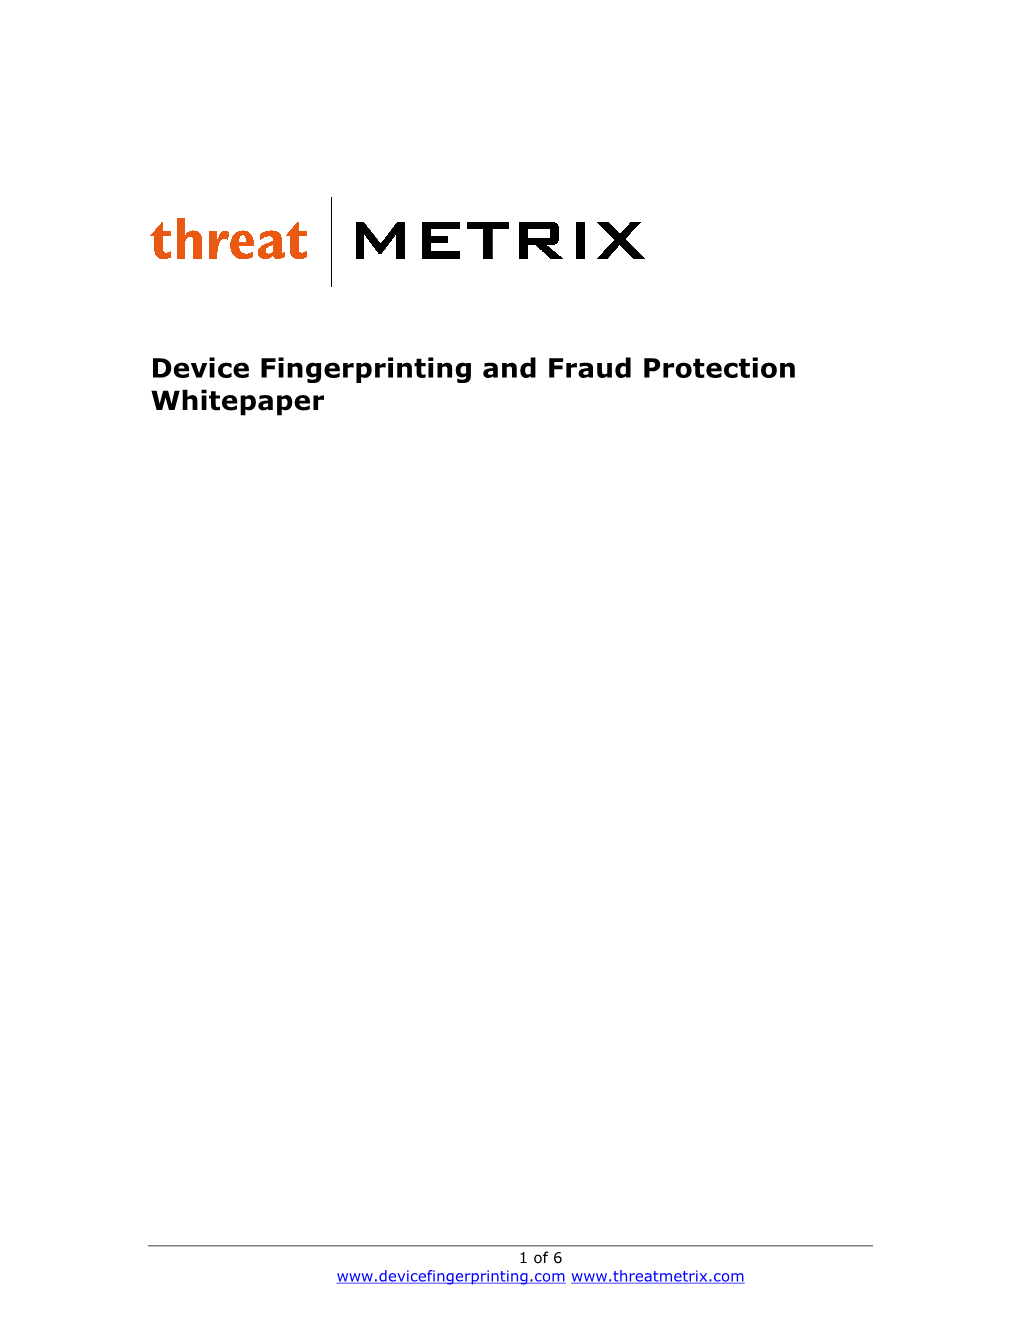 Device Fingerprinting and Fraud Protection Whitepaper